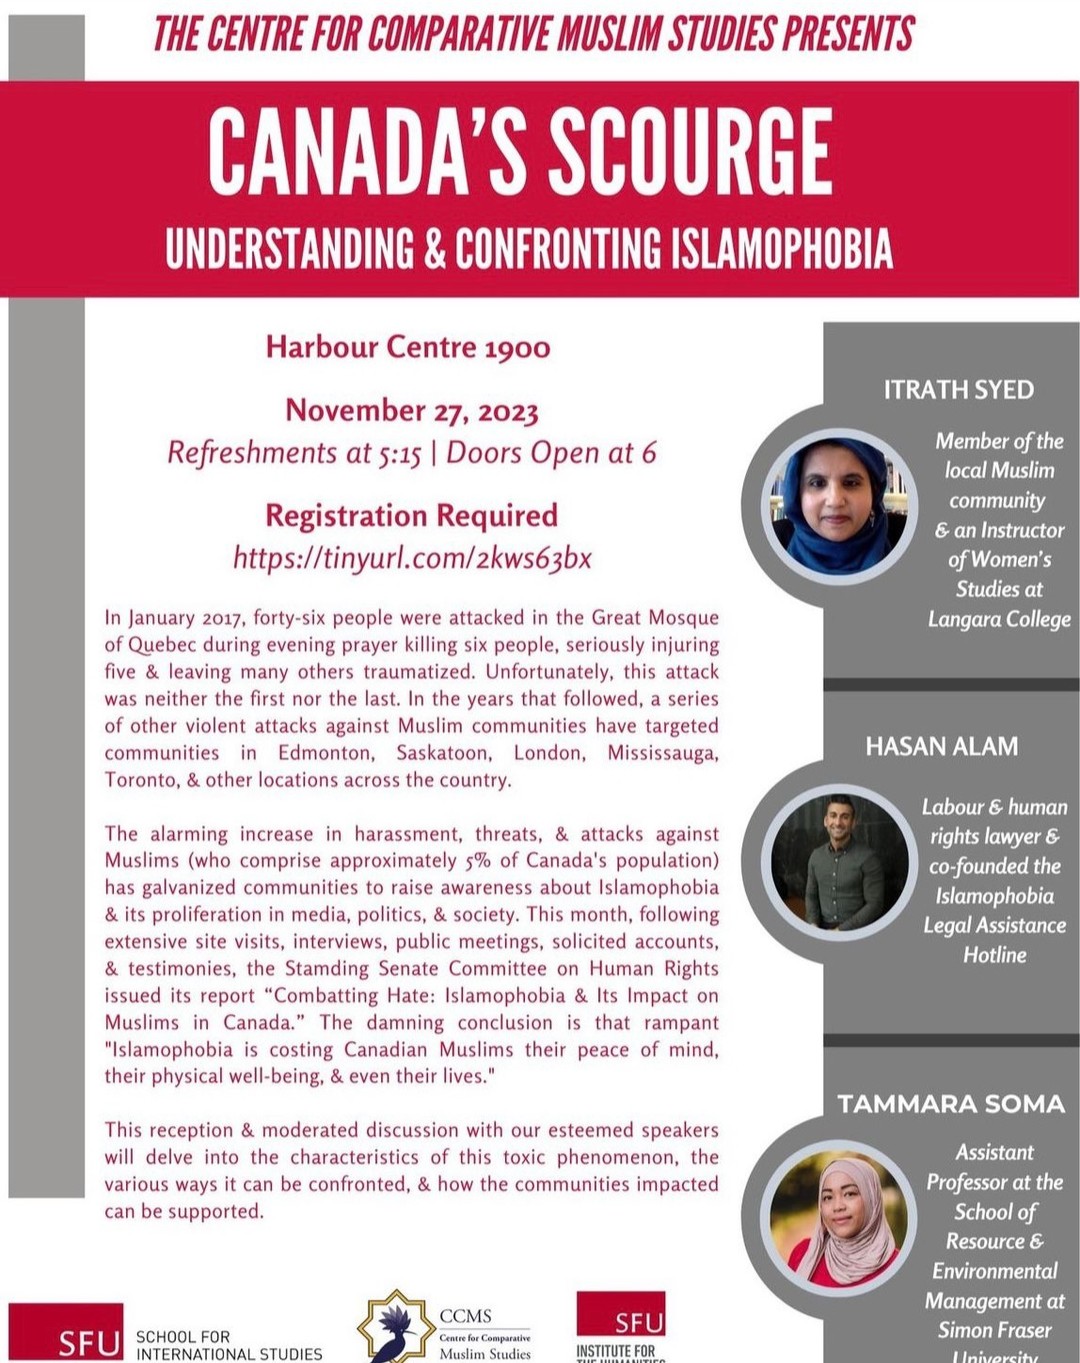 Canada's Scourge: Understanding & Confronting Islamophobia